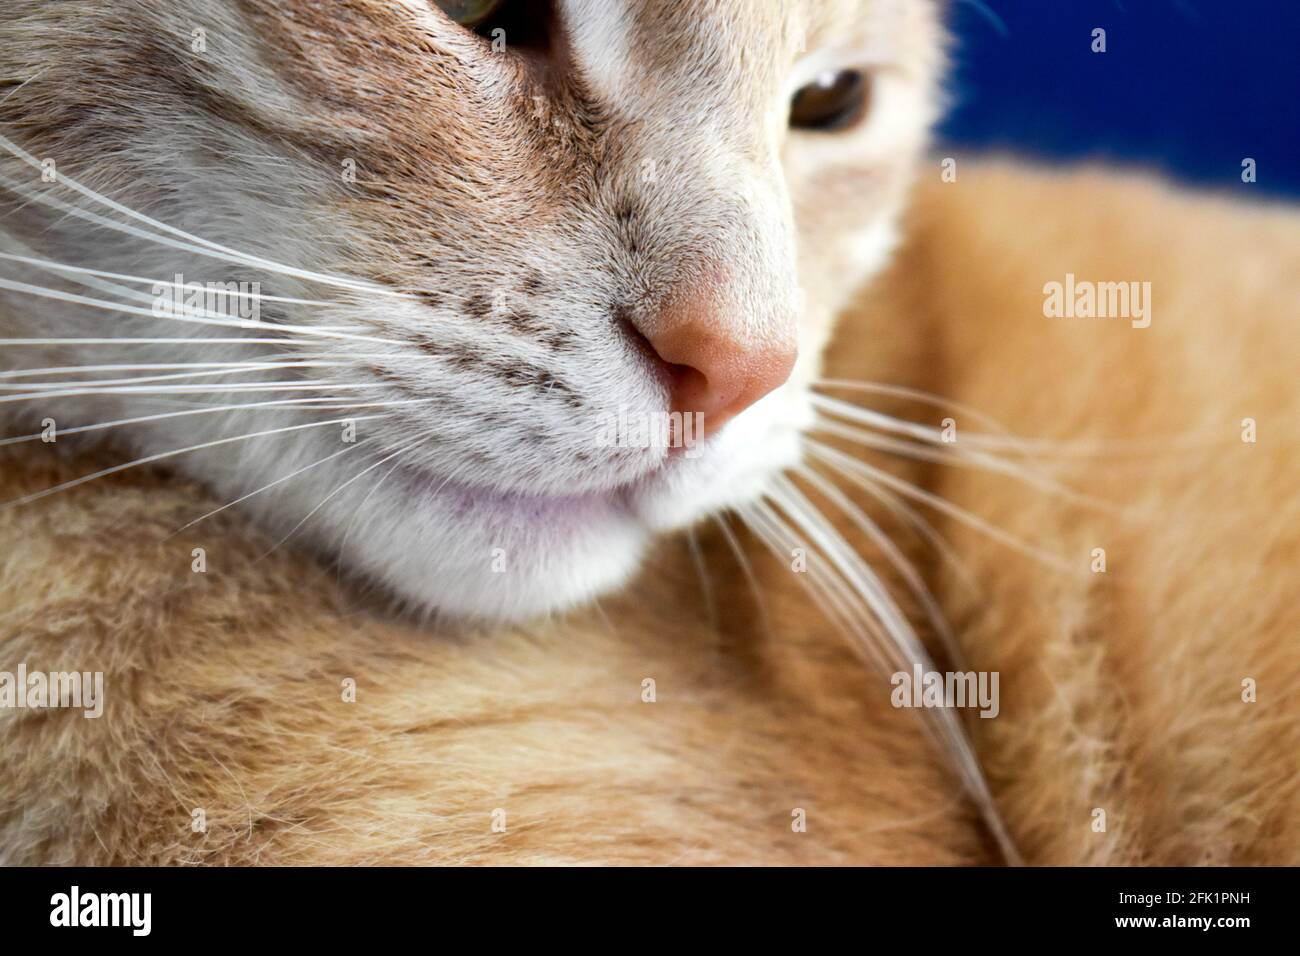 Ginger cat's nose close up Stock Photo